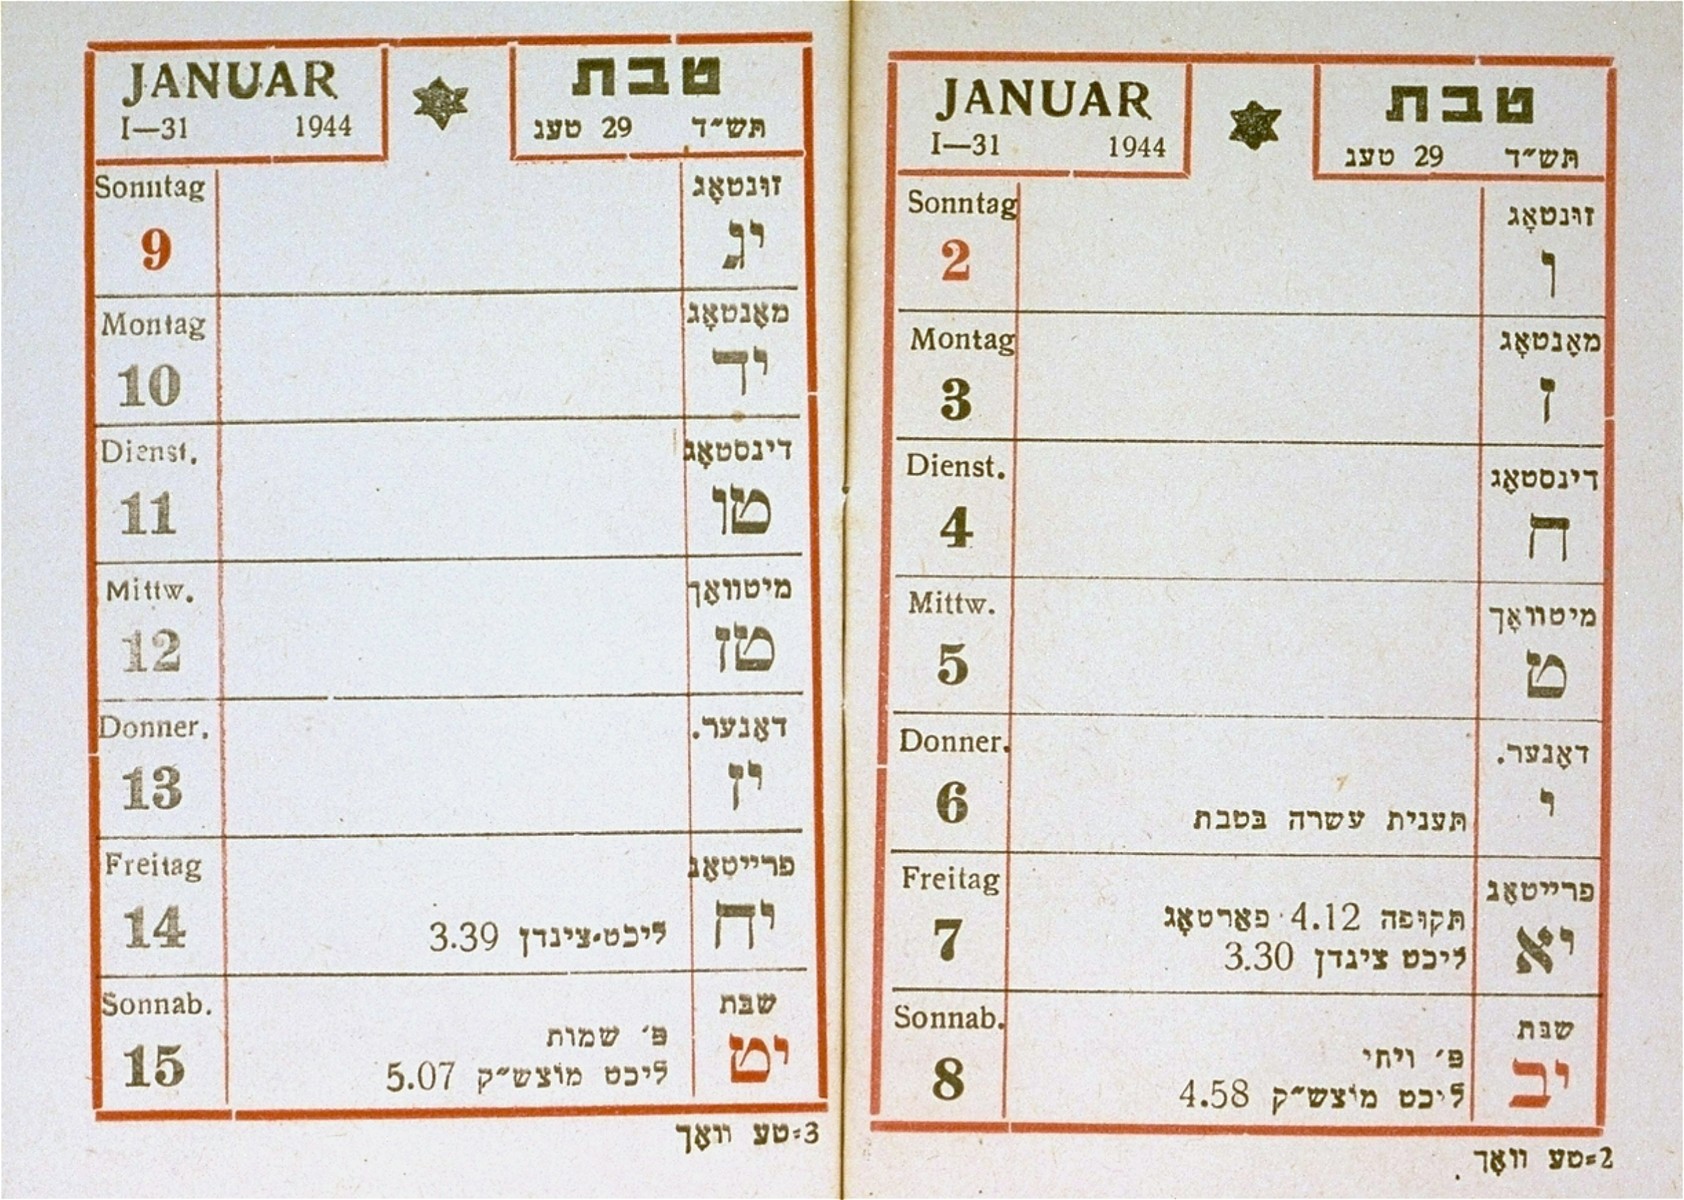 A page from a pocket calendar for the year 1944, printed in the Lodz ghetto.  The calendar was owned by Bernard Fuchs, head of the employment office of the Lodz ghetto Jewish Council.